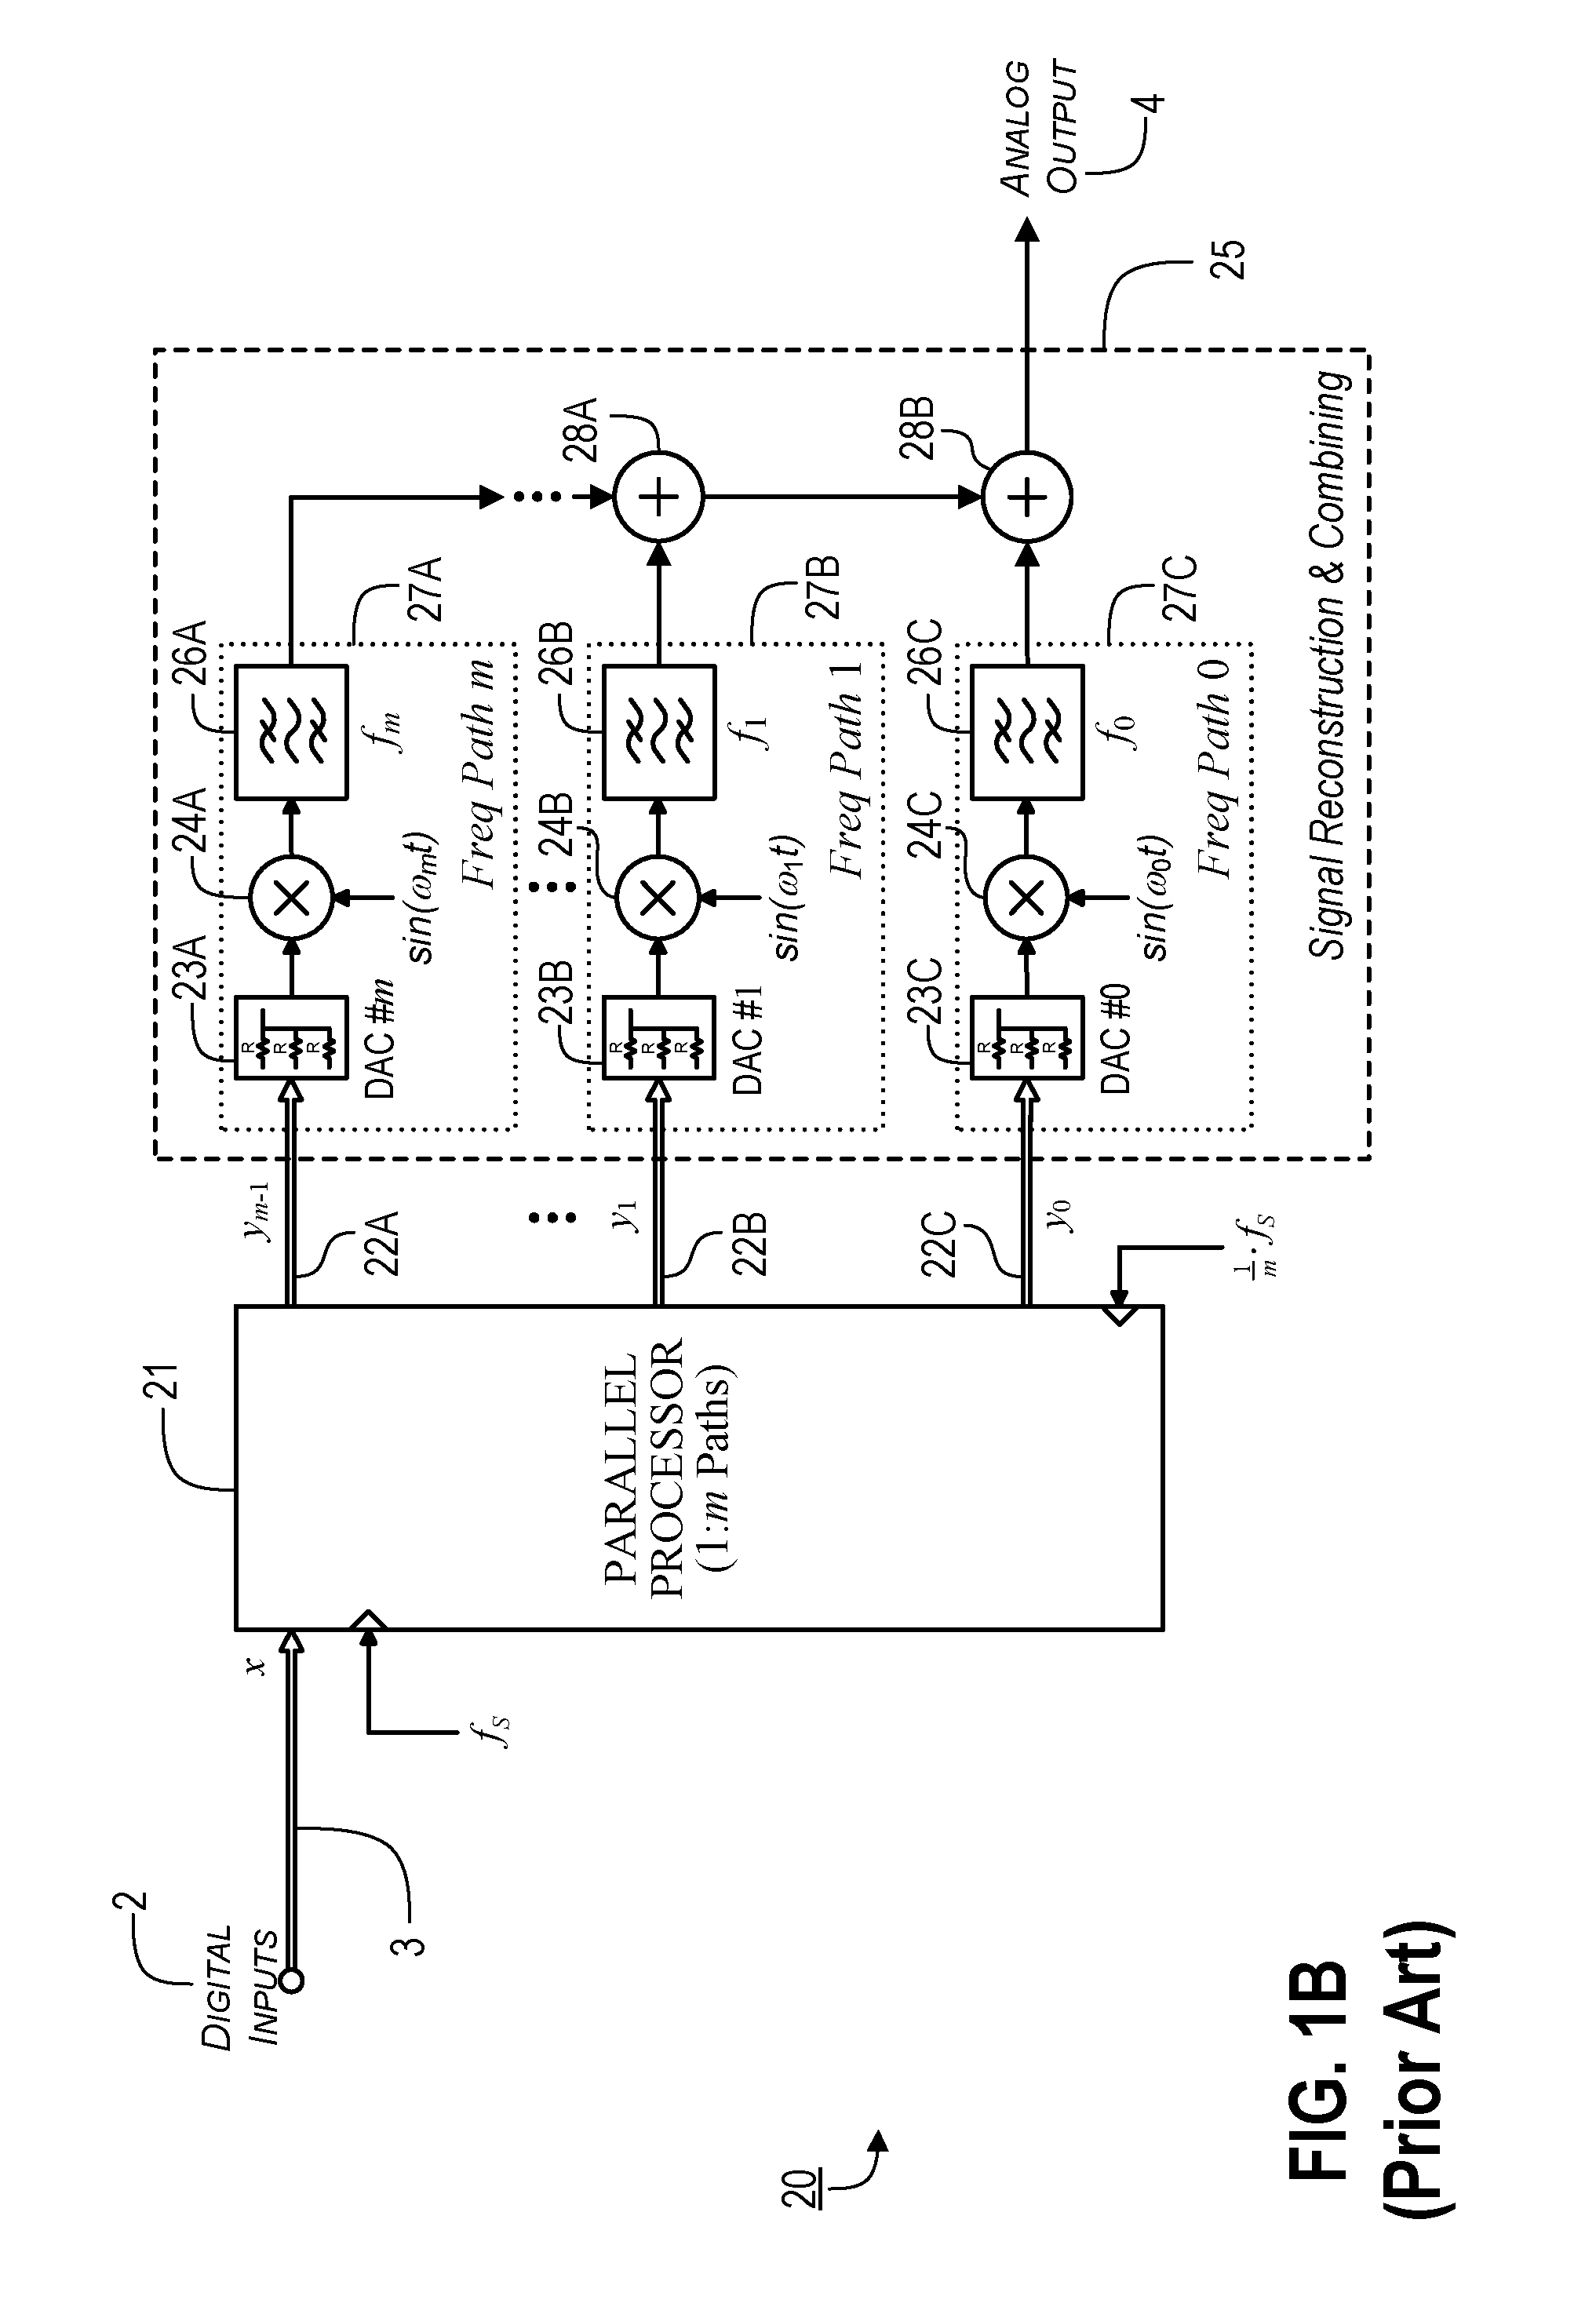 Distributed Combiner for Parallel Discrete-to-Linear Converters